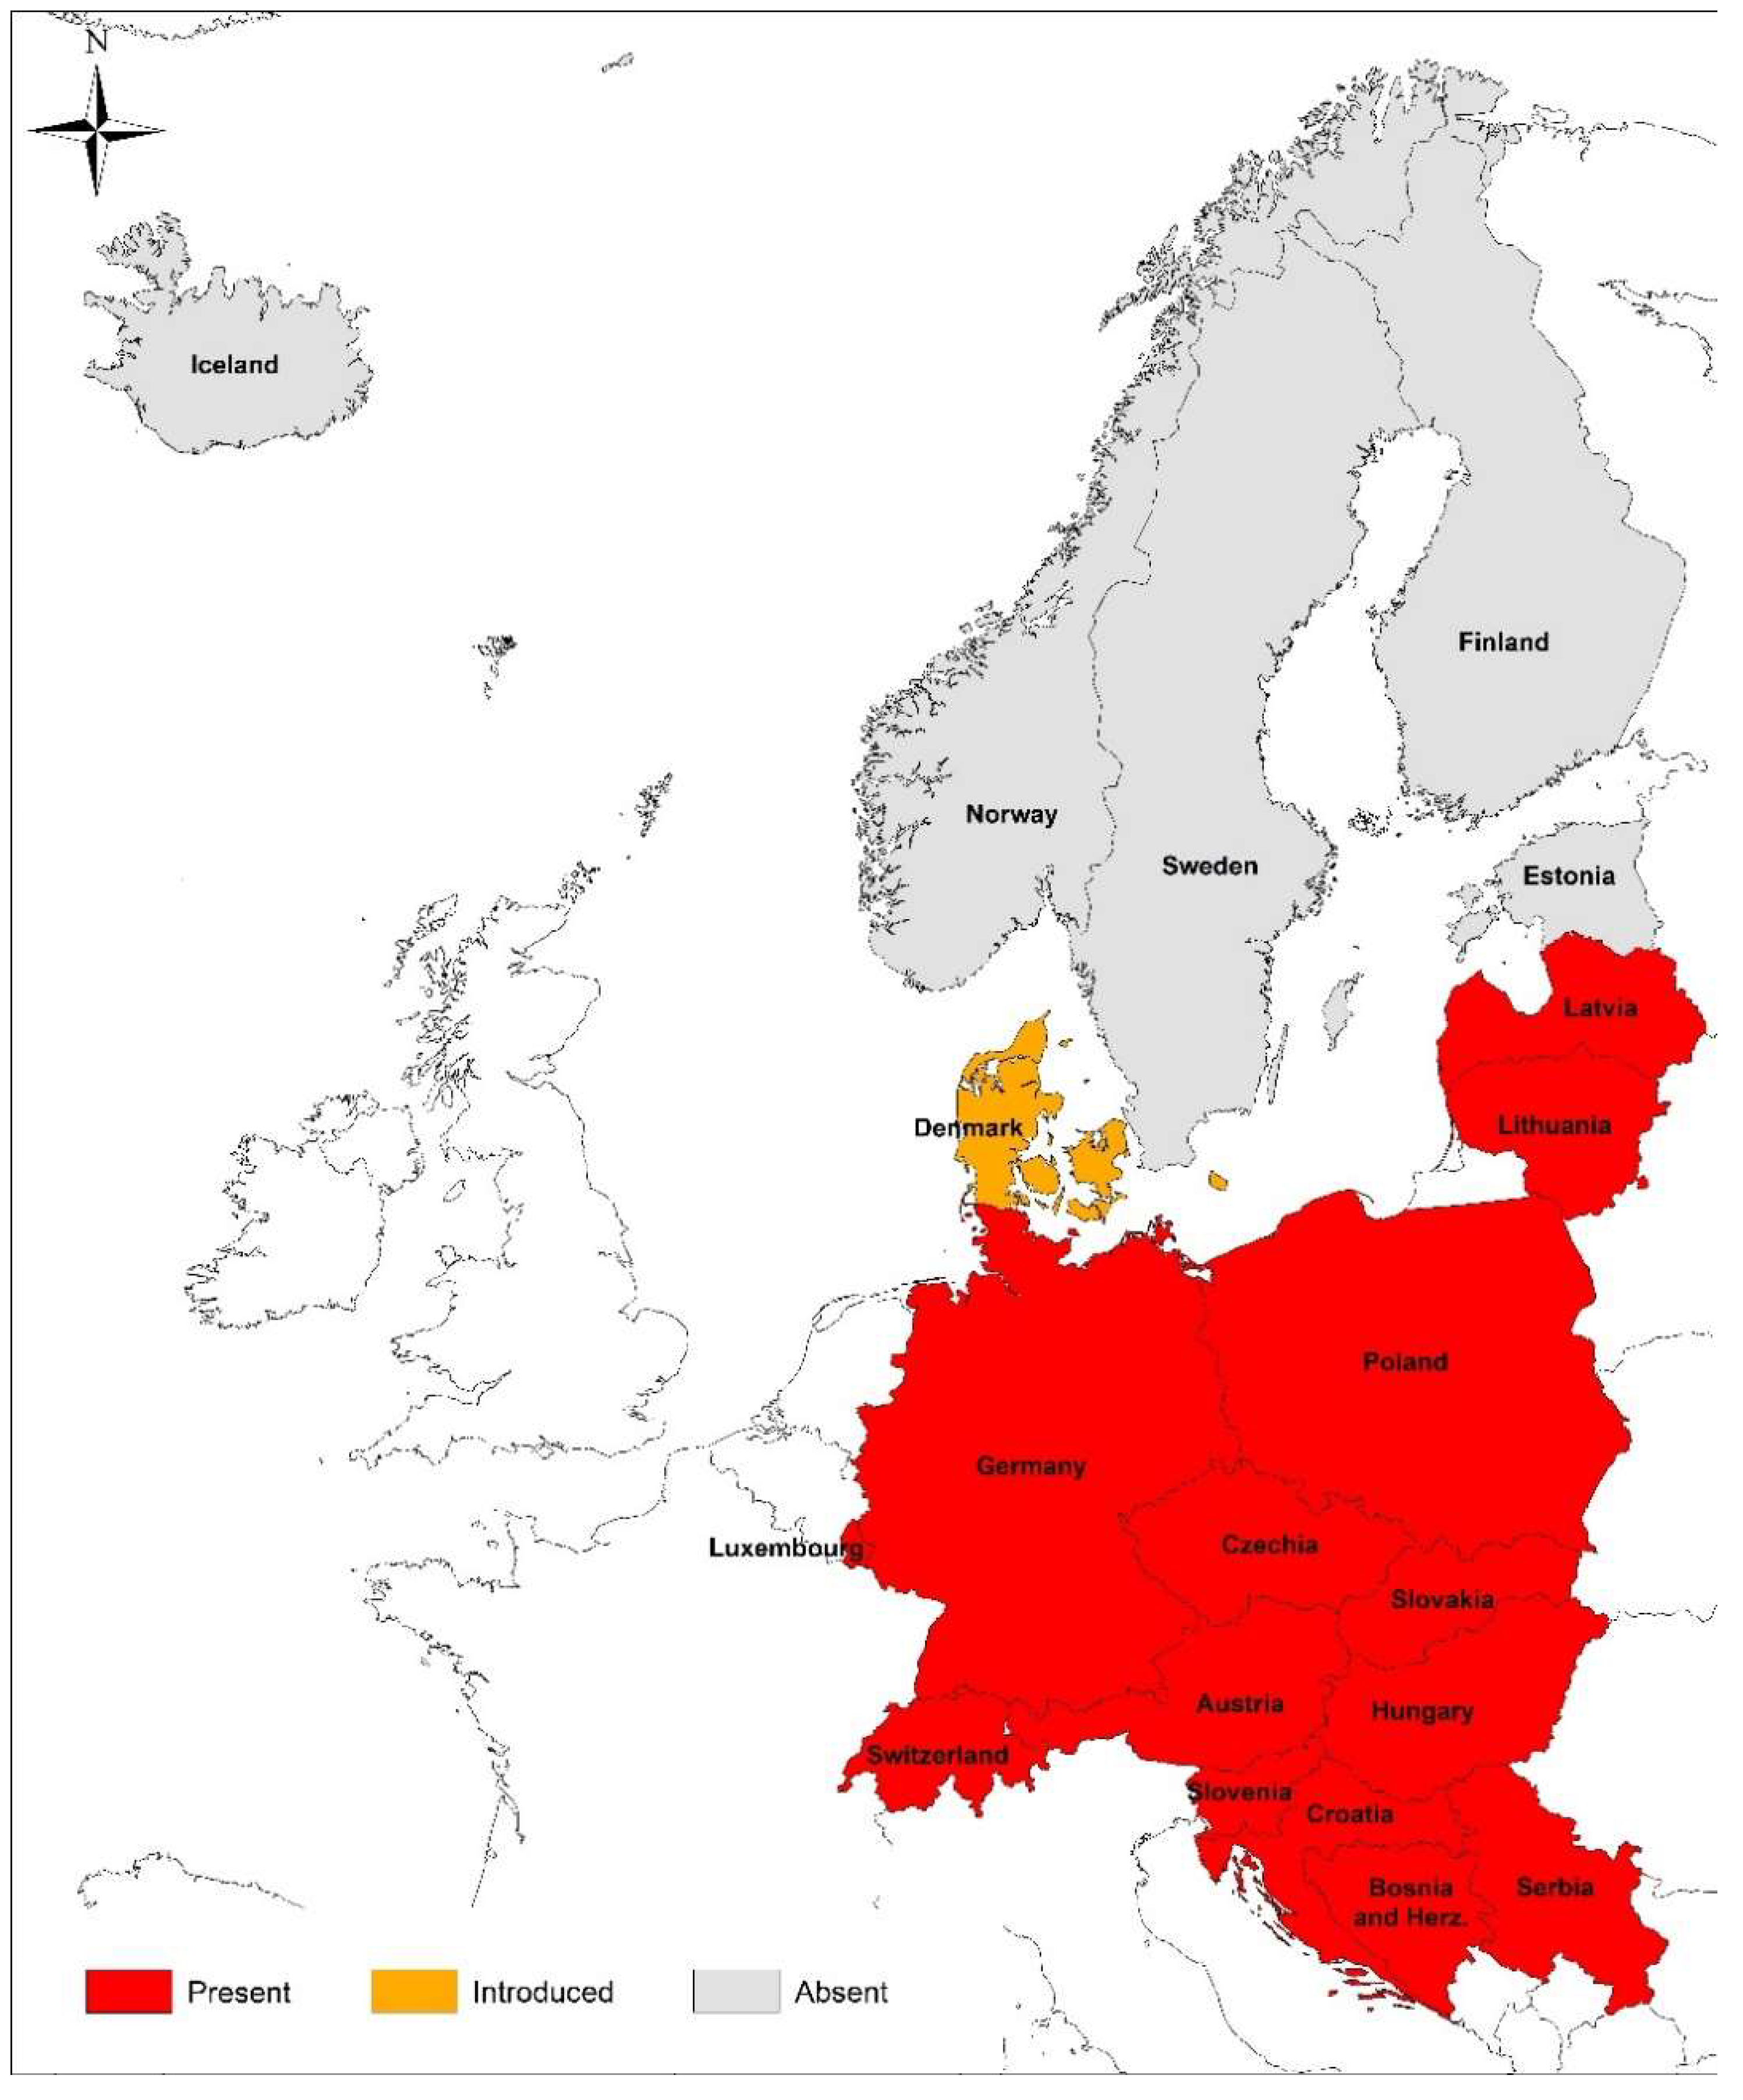 Microorganisms | Free Full-Text | Babesiosis in Southeastern, Central and  Northeastern Europe: An Emerging and Re-Emerging Tick-Borne Disease of  Humans and Animals